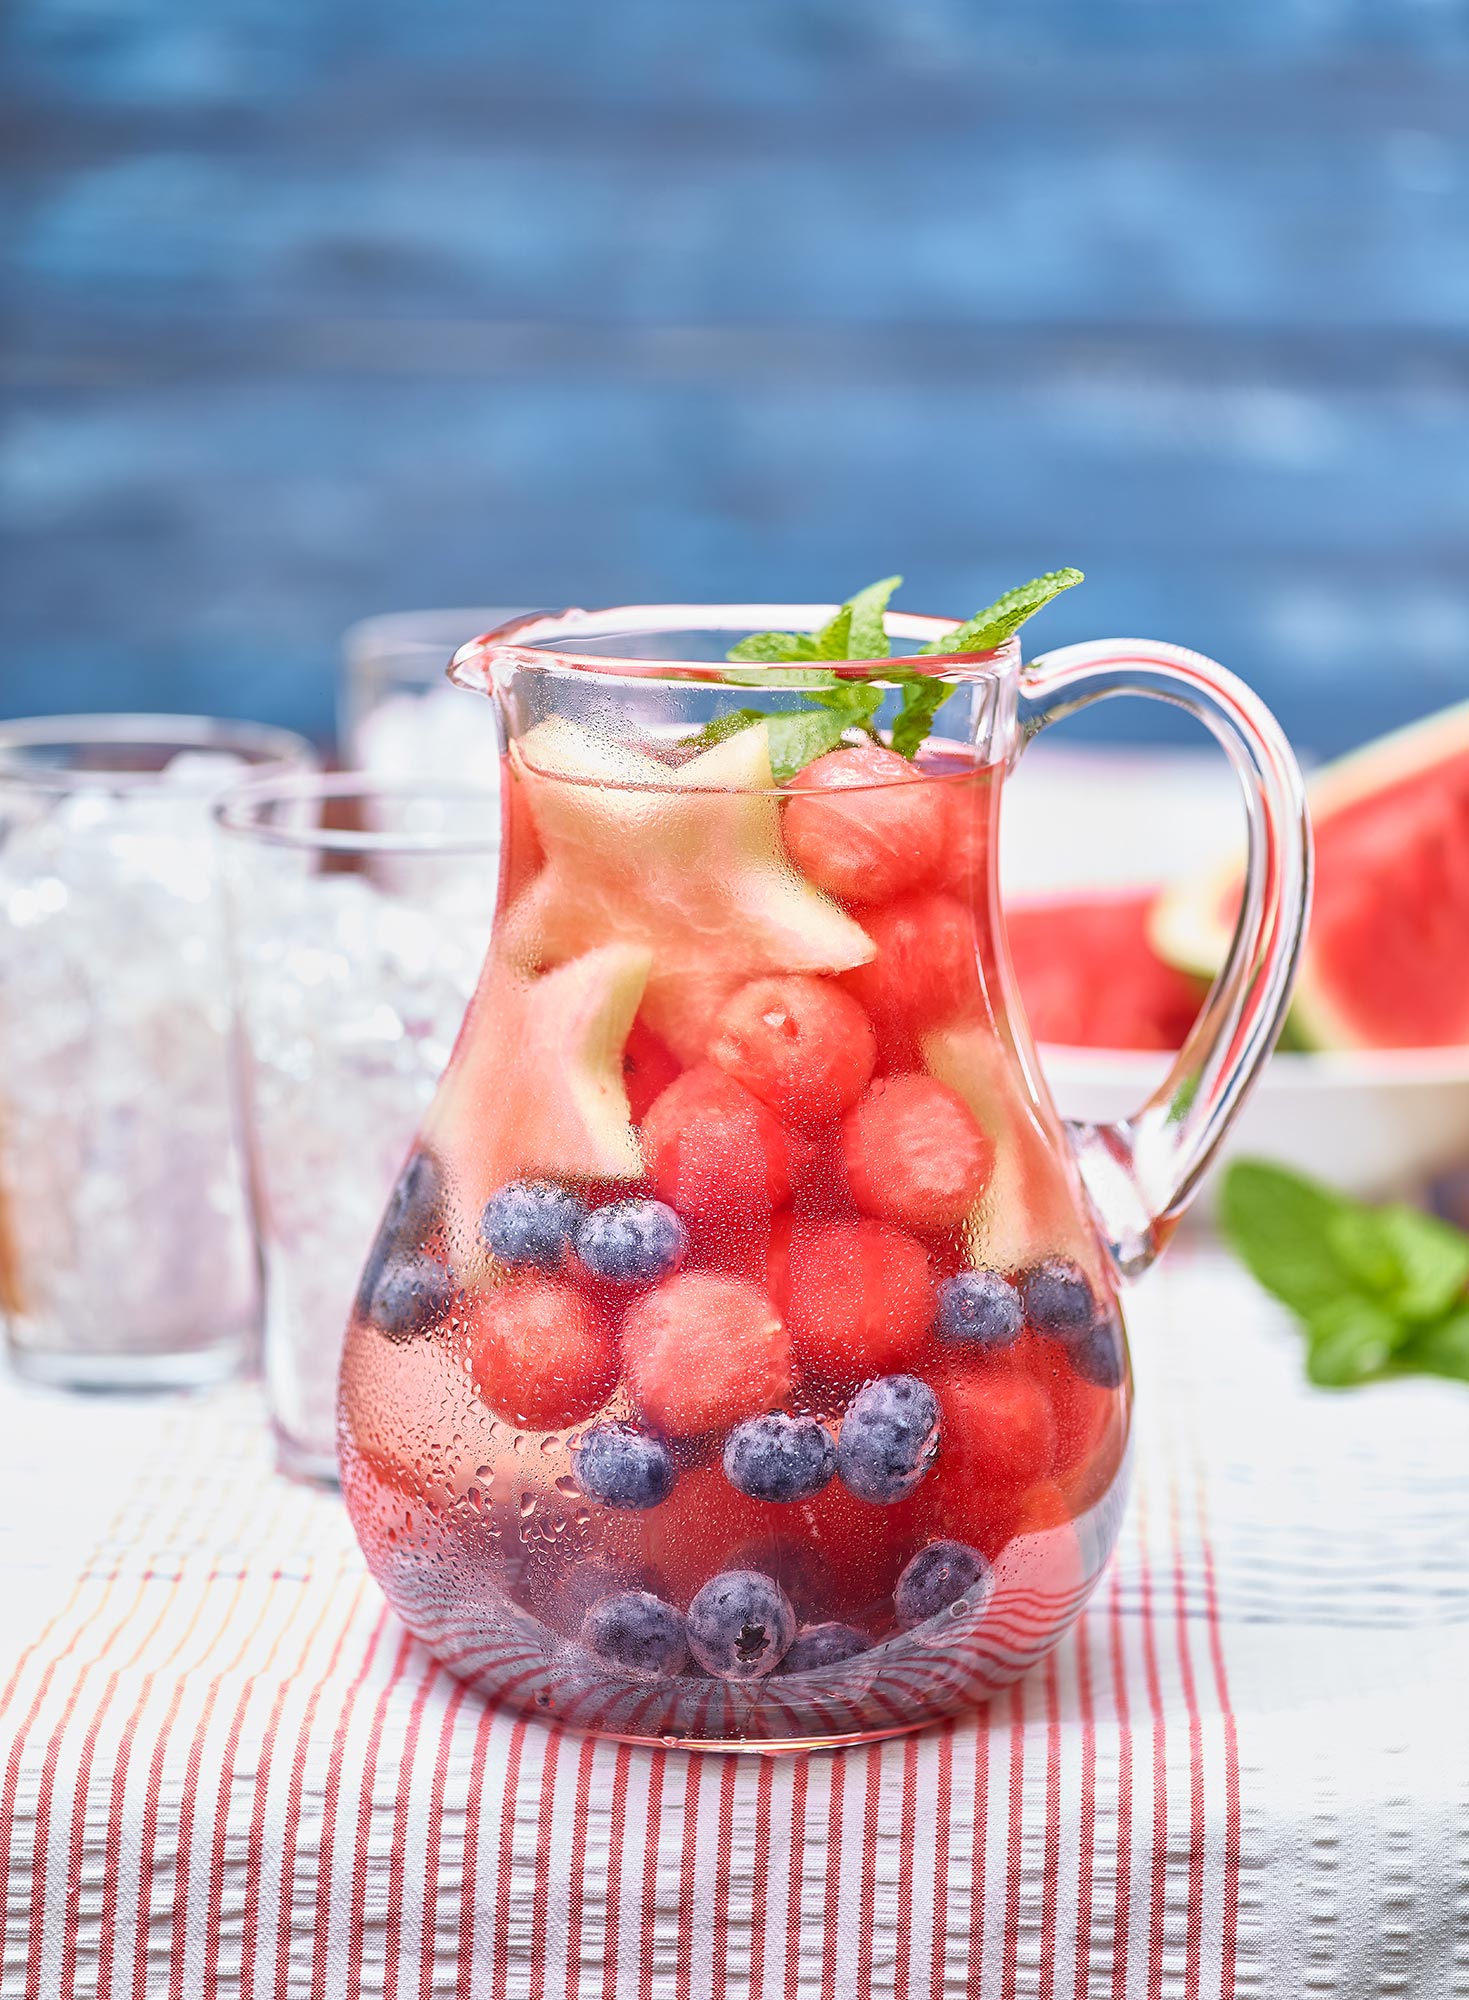 melon-infused water - produce made simple on watermelon infused water recipe